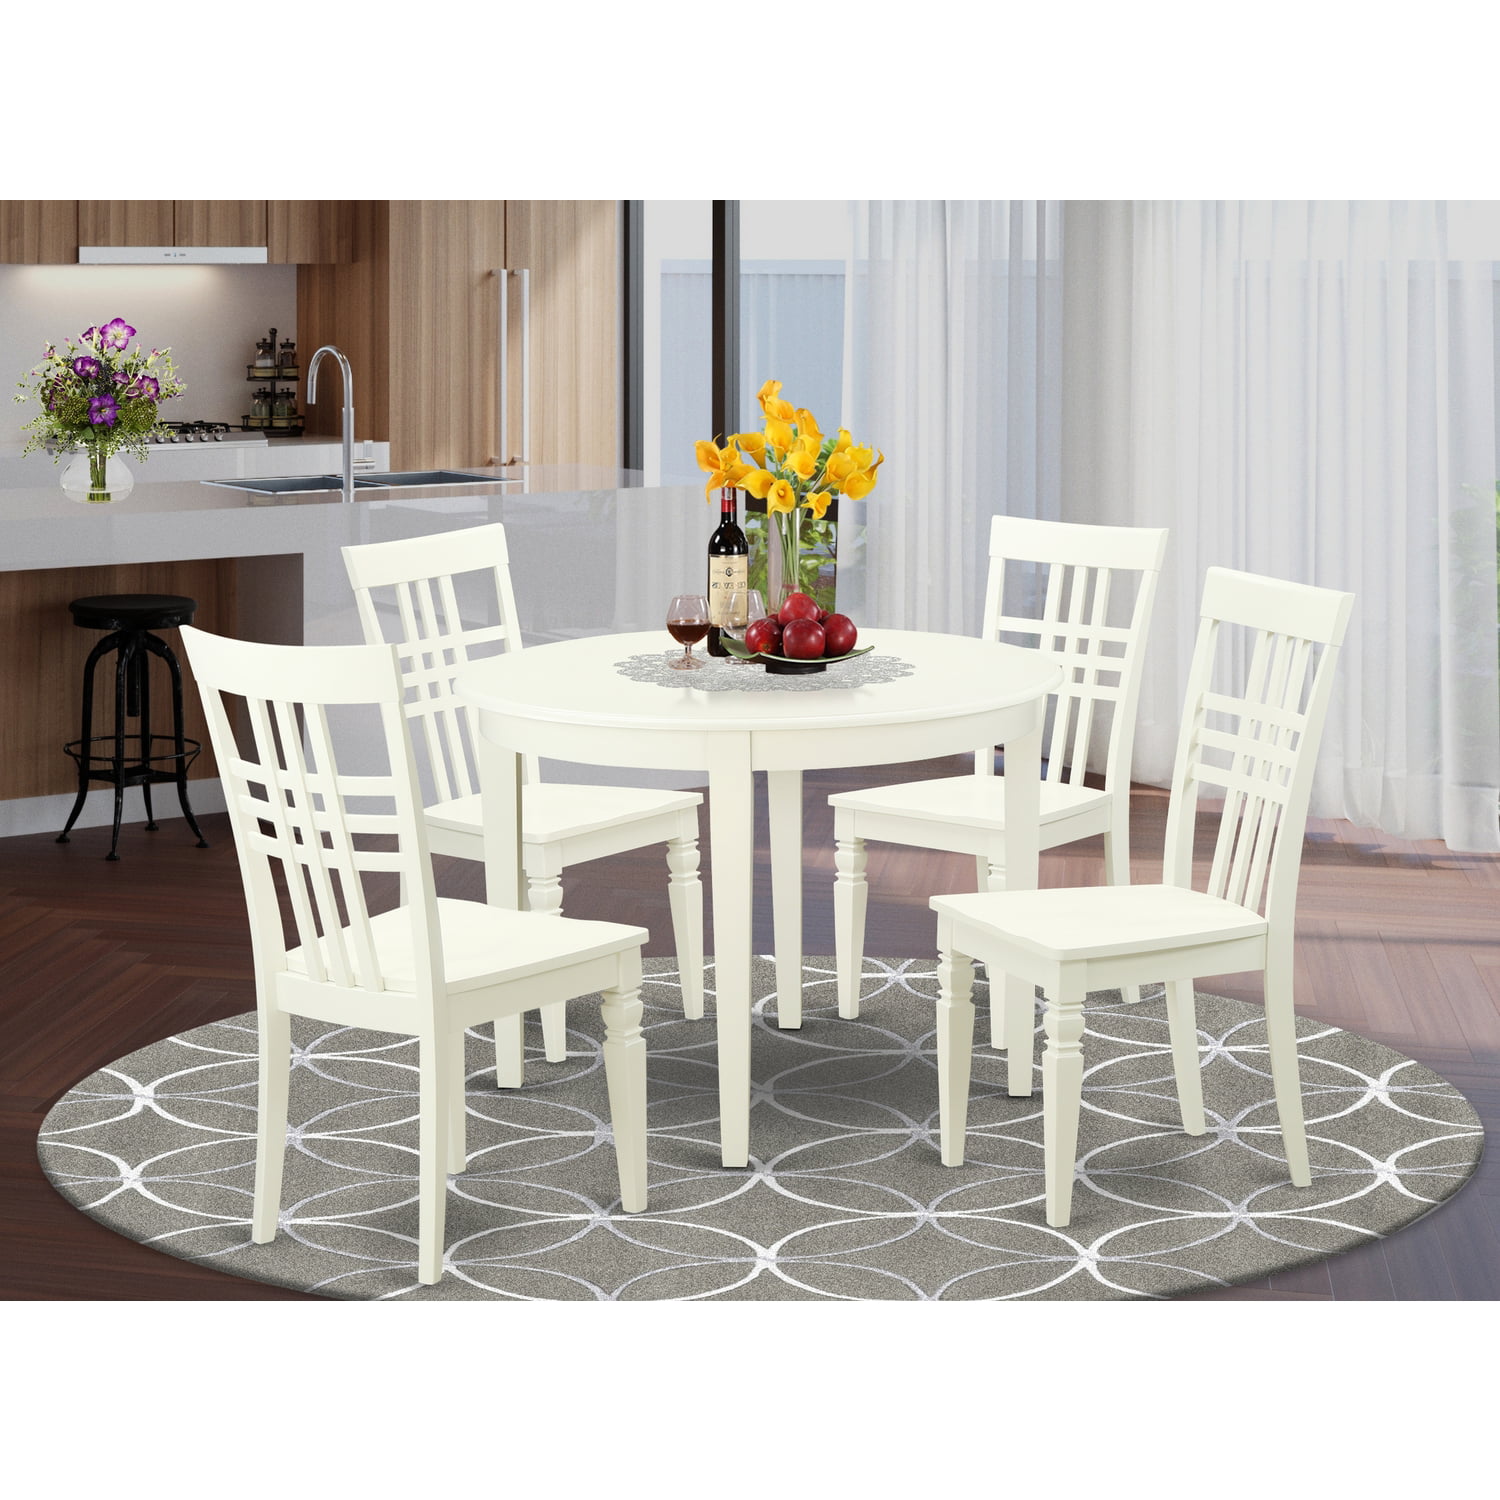 Small kitchen table set with Boston dining table and kitchen chairs